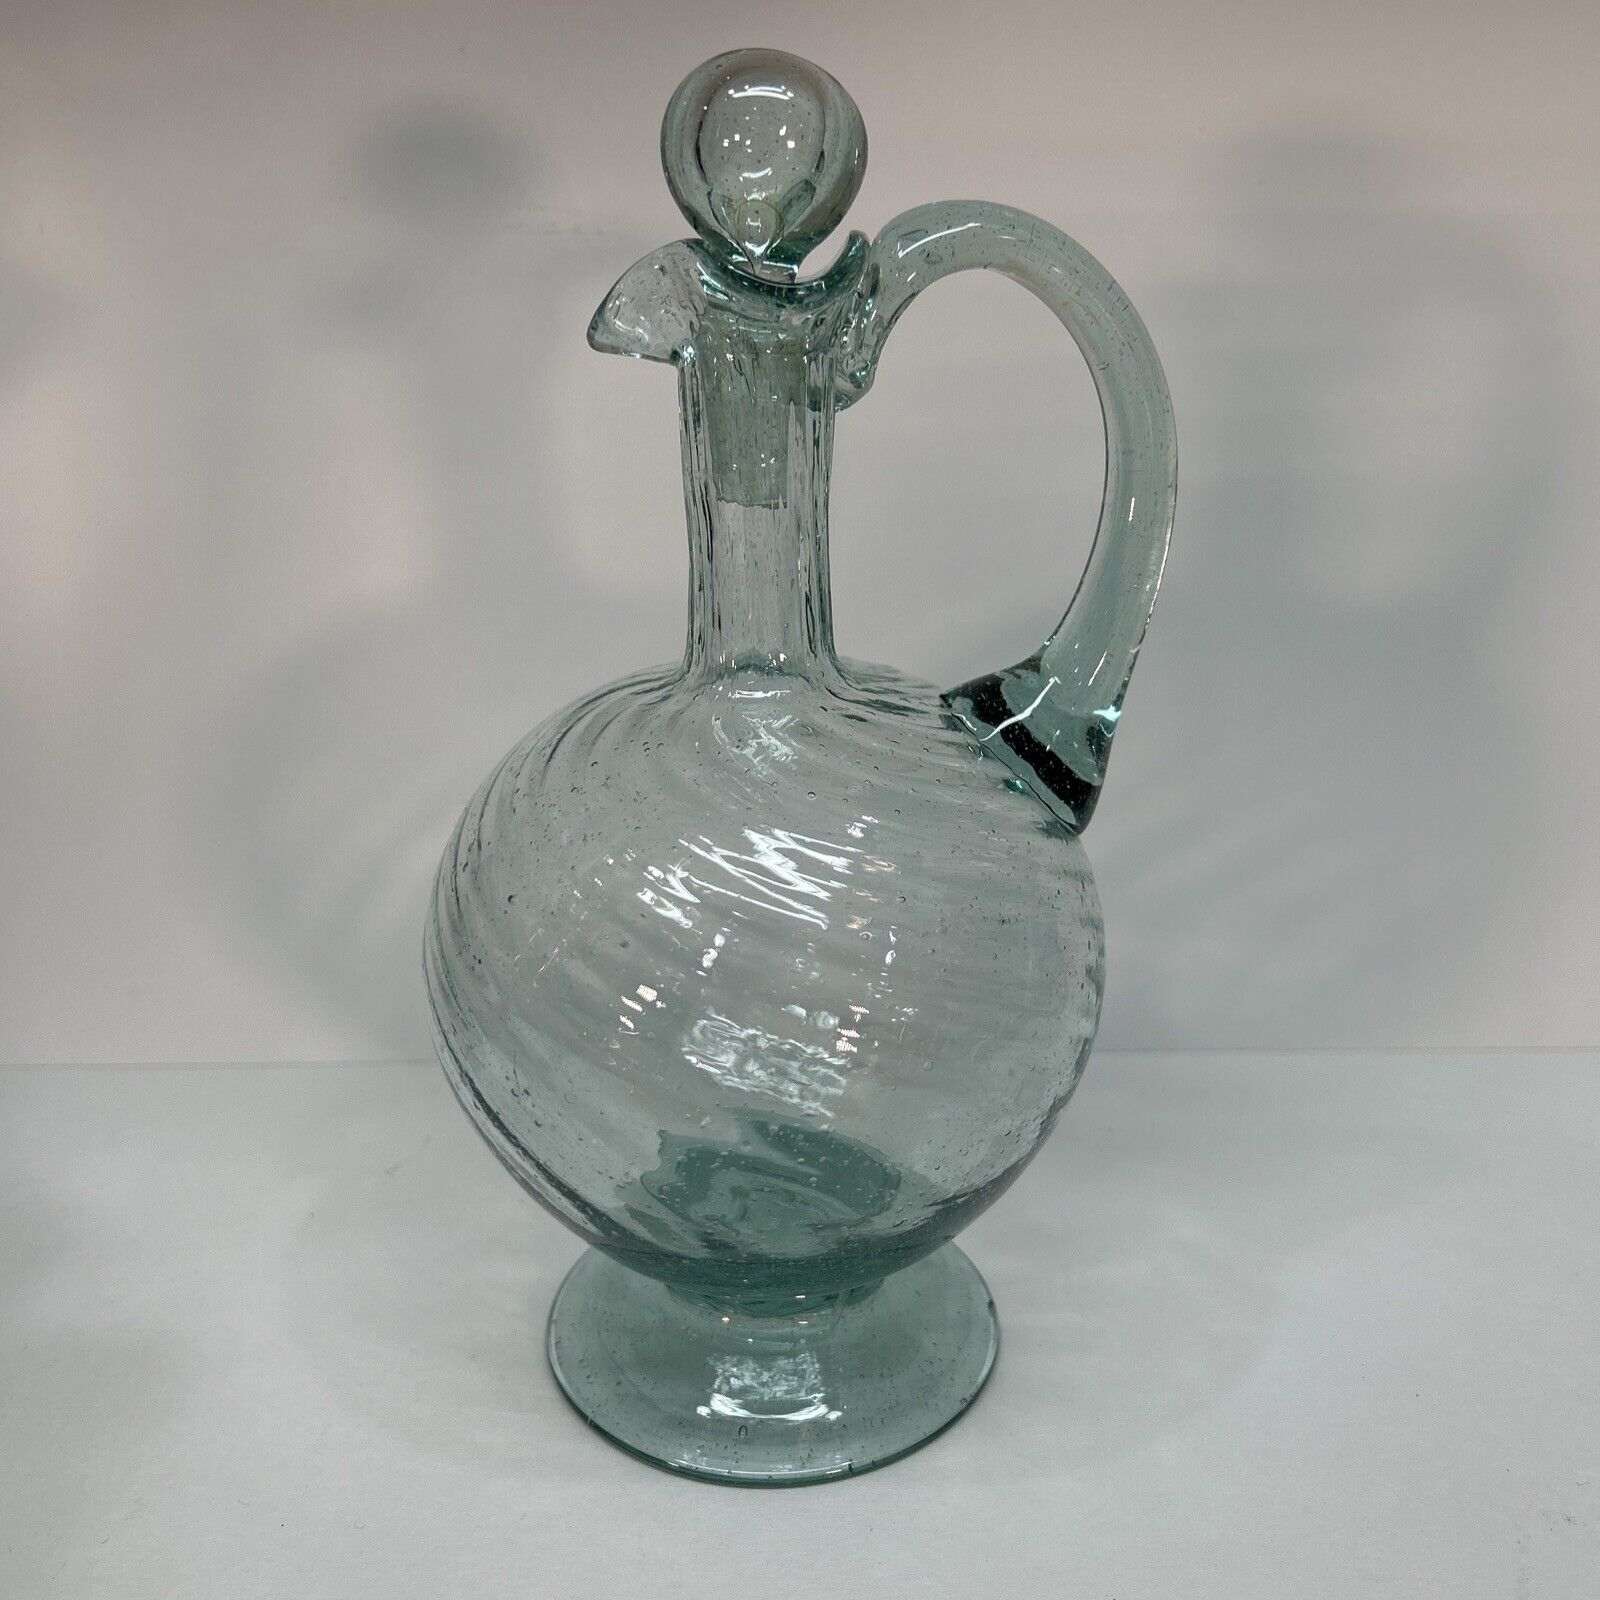 Antique Teal swirl blown glass pitcher with stopper